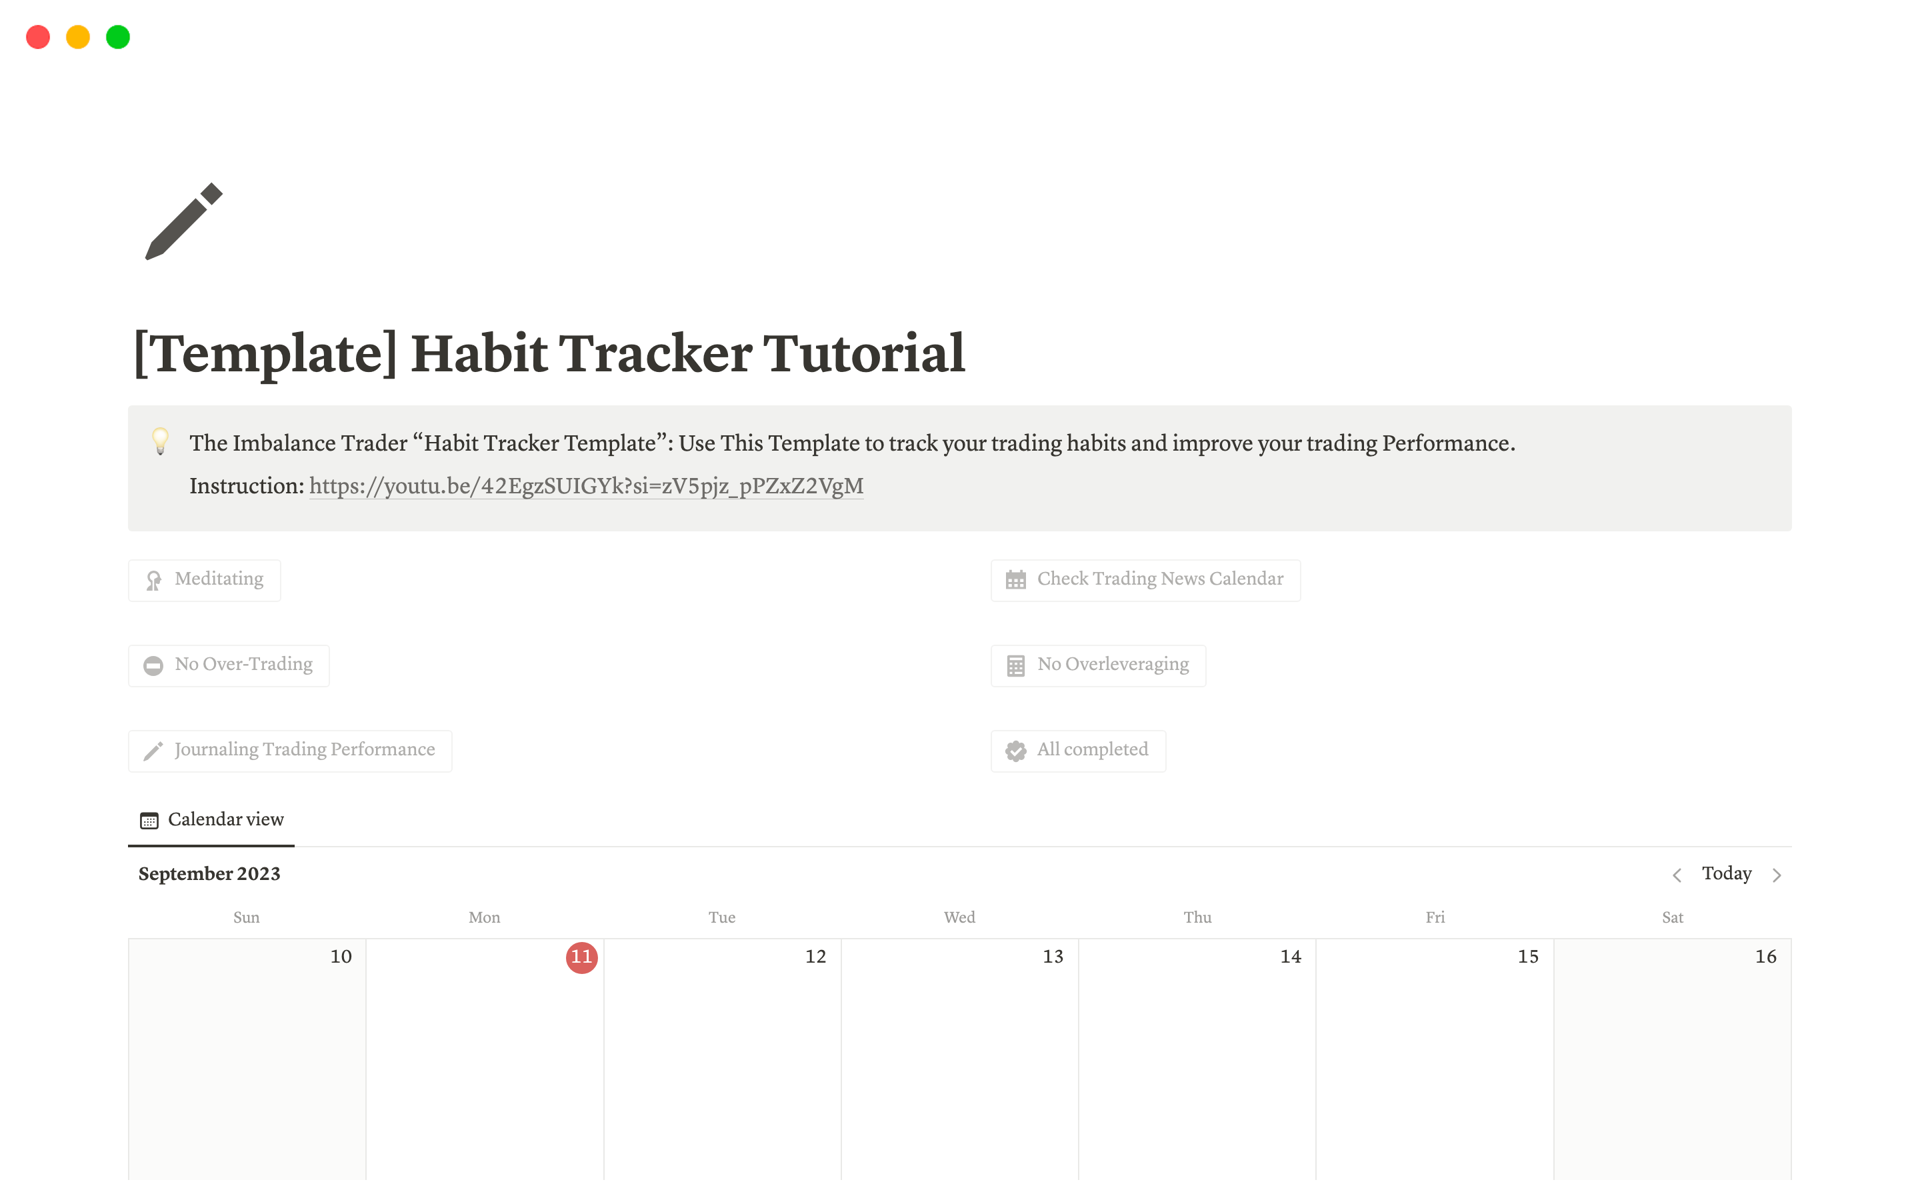 Trading Habit Tracker Template to help traders improve their trading performance